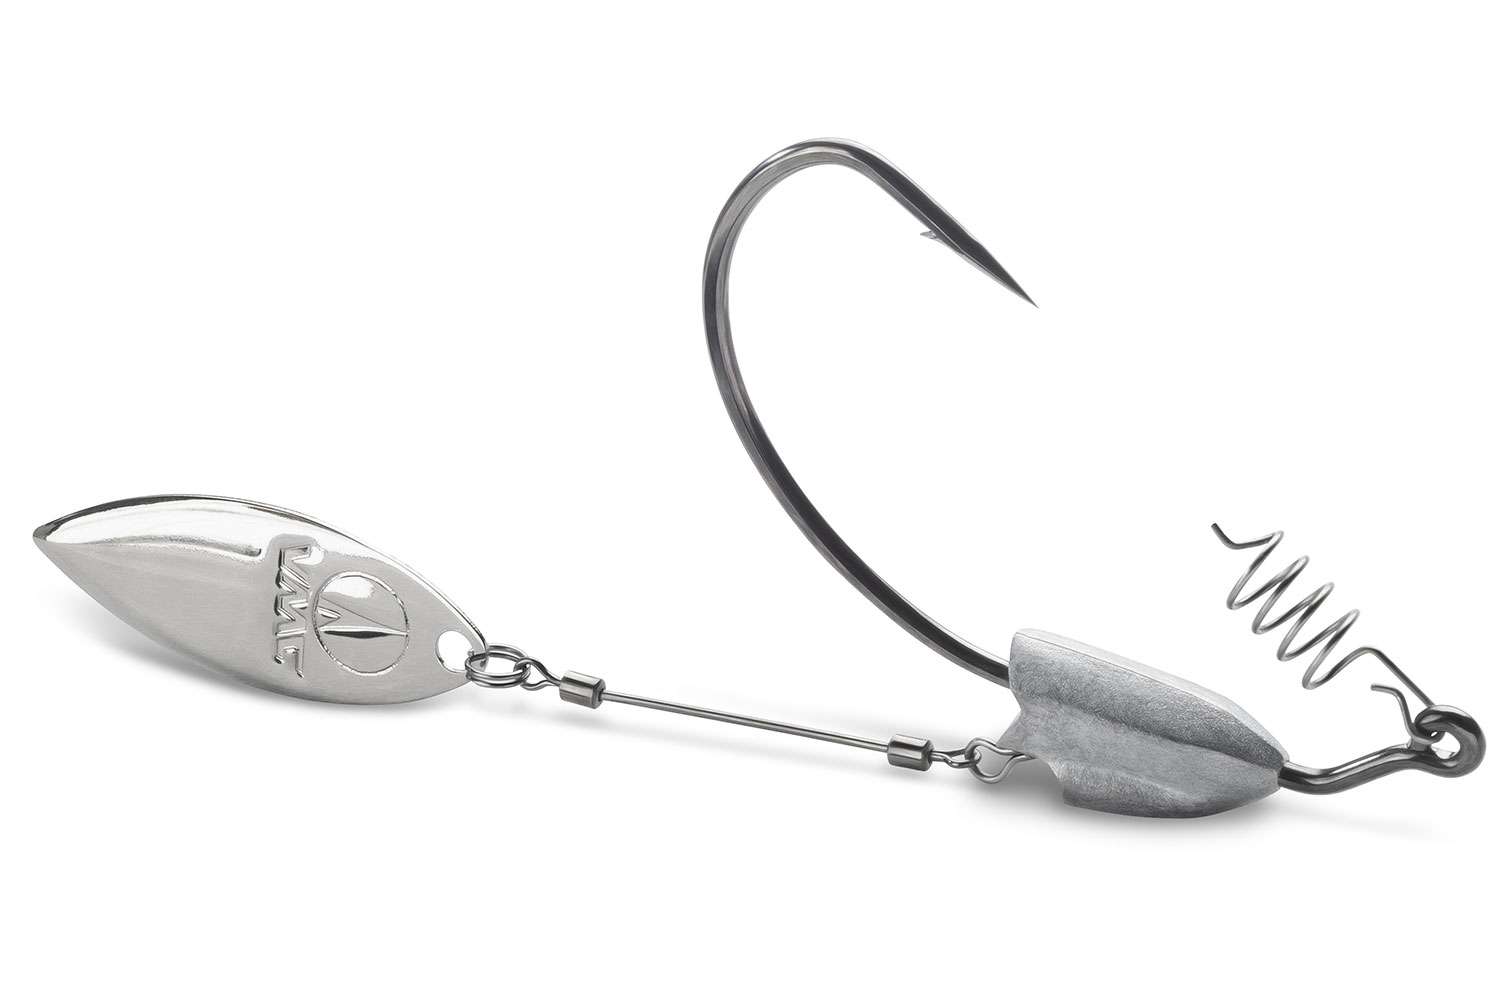 <B>VMC Heavy Duty Weighted Willow Swimbait Hook </B>
<BR>This hook features an adjustable spinner arm for maximum rotation and optimal blade position; a self-centering spring securely holds the bait in place, fixed weight, hi-carbon steel and a needlepoint. Available in 3/0 3/16-ounce, 4/0 3/16-ounce, 5/0 1/4-ounce, 6/0 3/8-ounce, 7/0 3/8-ounce, 9/0 3/8-ounce and 11/0 1/2-ounce. 
<BR>
<B>MSRP: $6.99-$11.99</B>